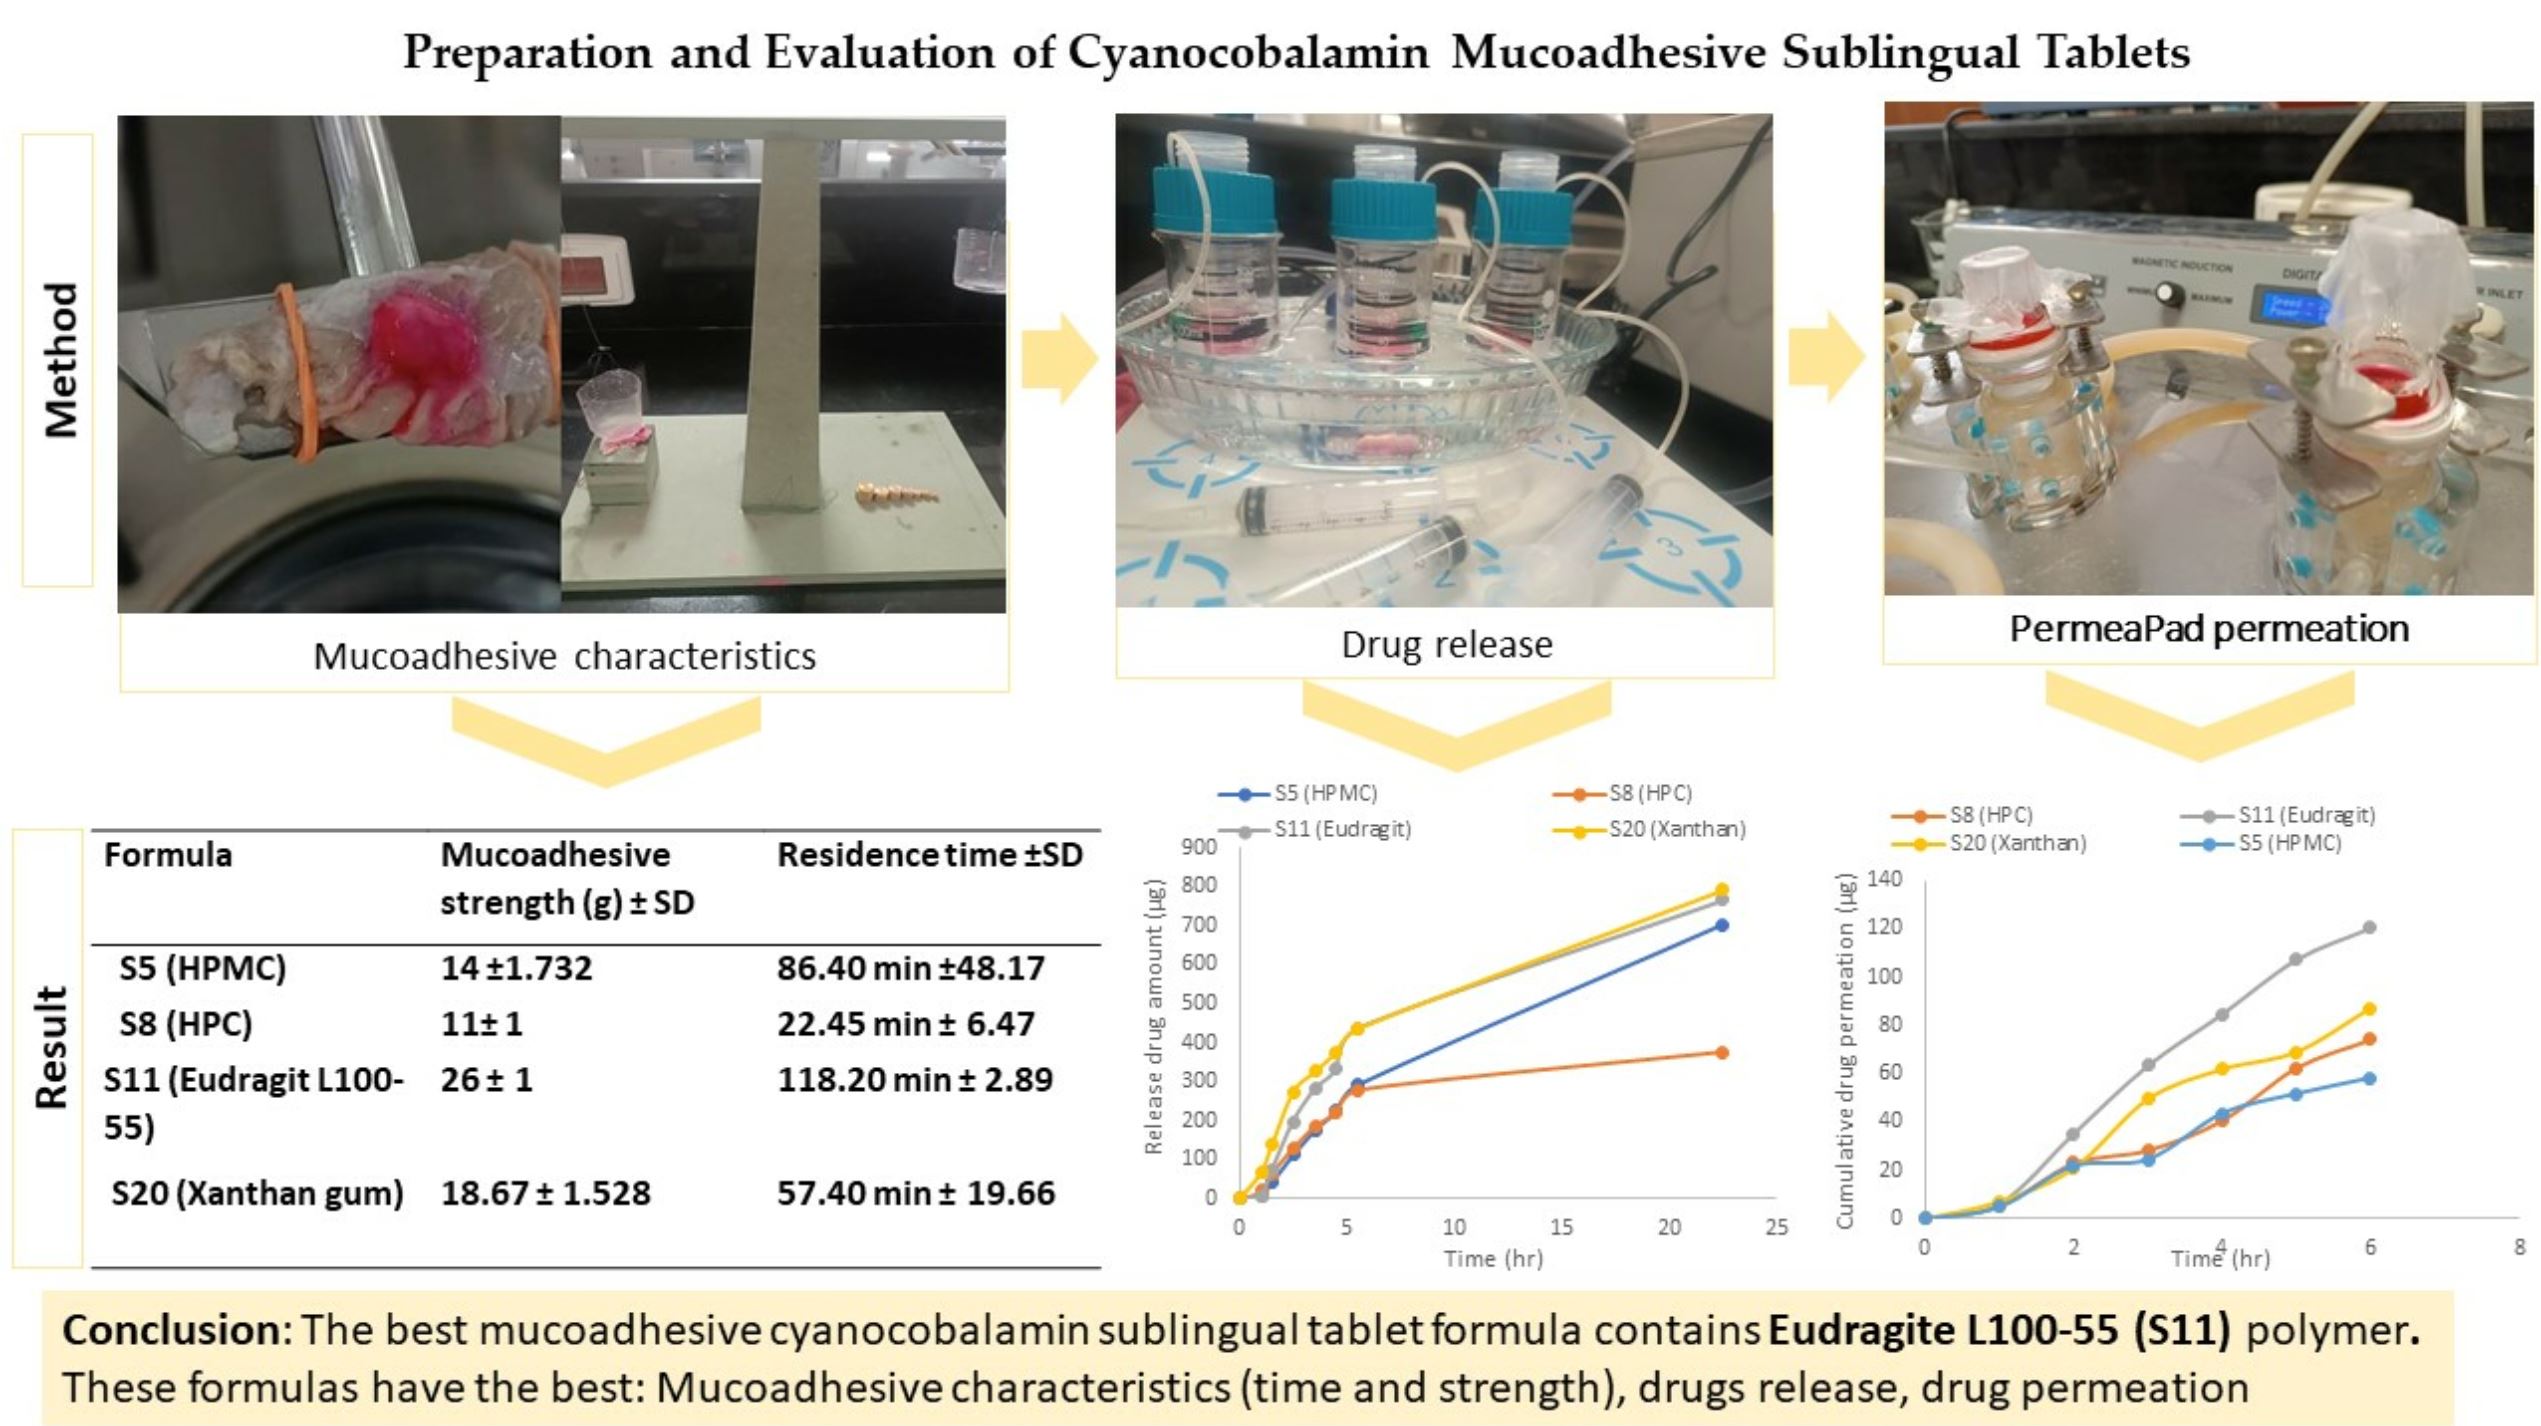 The Preparation and Evaluation of Cyanocobalamin Mucoadhesive Sublingual Tablets